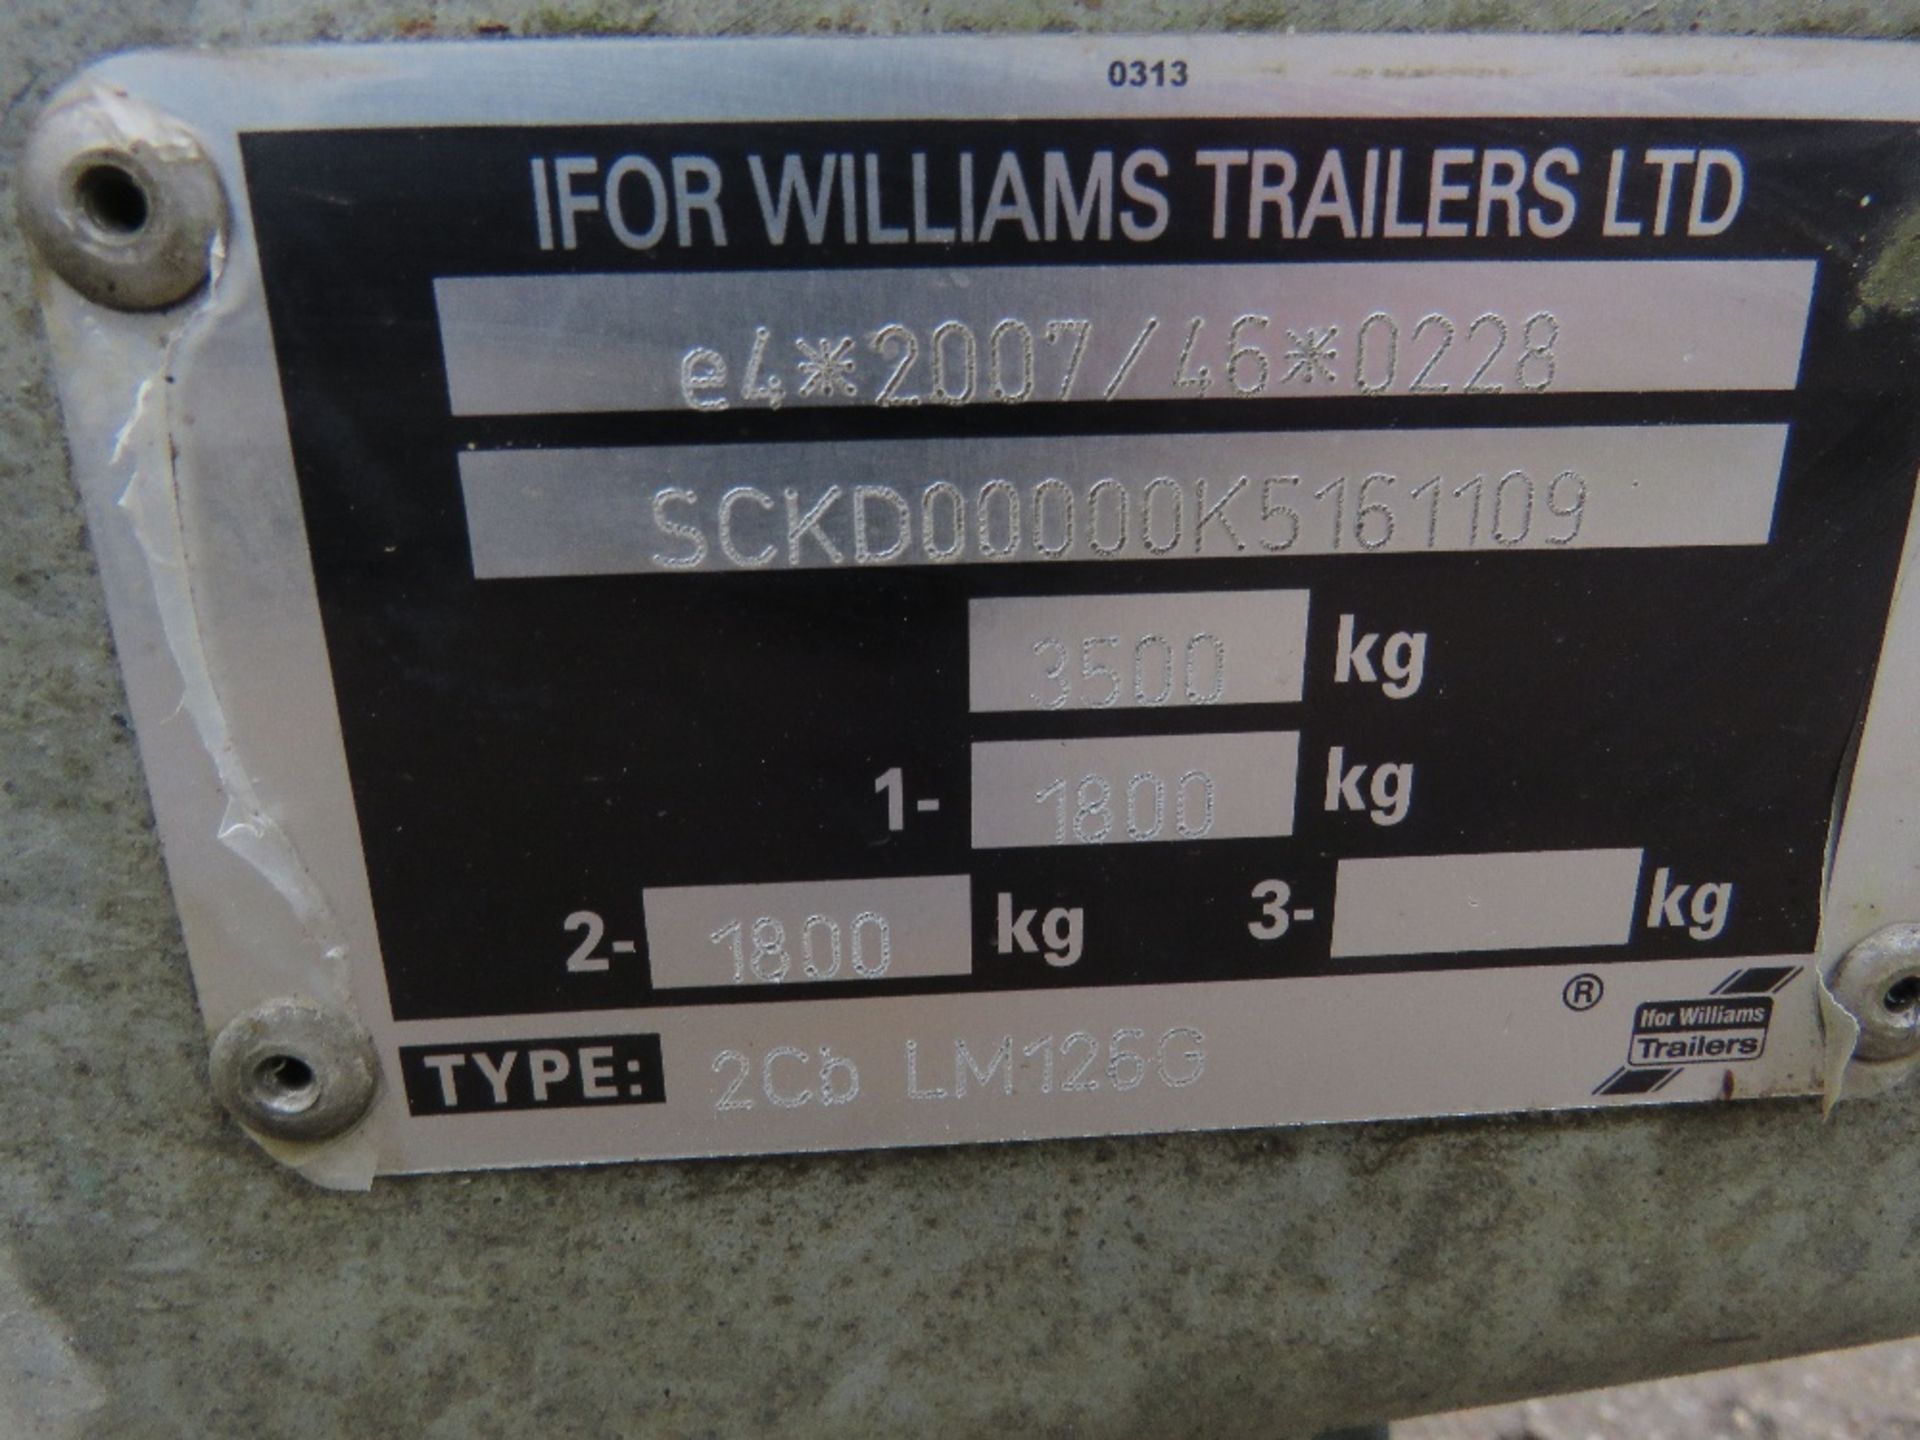 IFOR WILLIAMS 12FT LM126G TWIN AXLED PLANT TRAILER WITH SIDES, RAMPS AND TIE DOWN RINGS. YEAR 2019, - Image 3 of 11